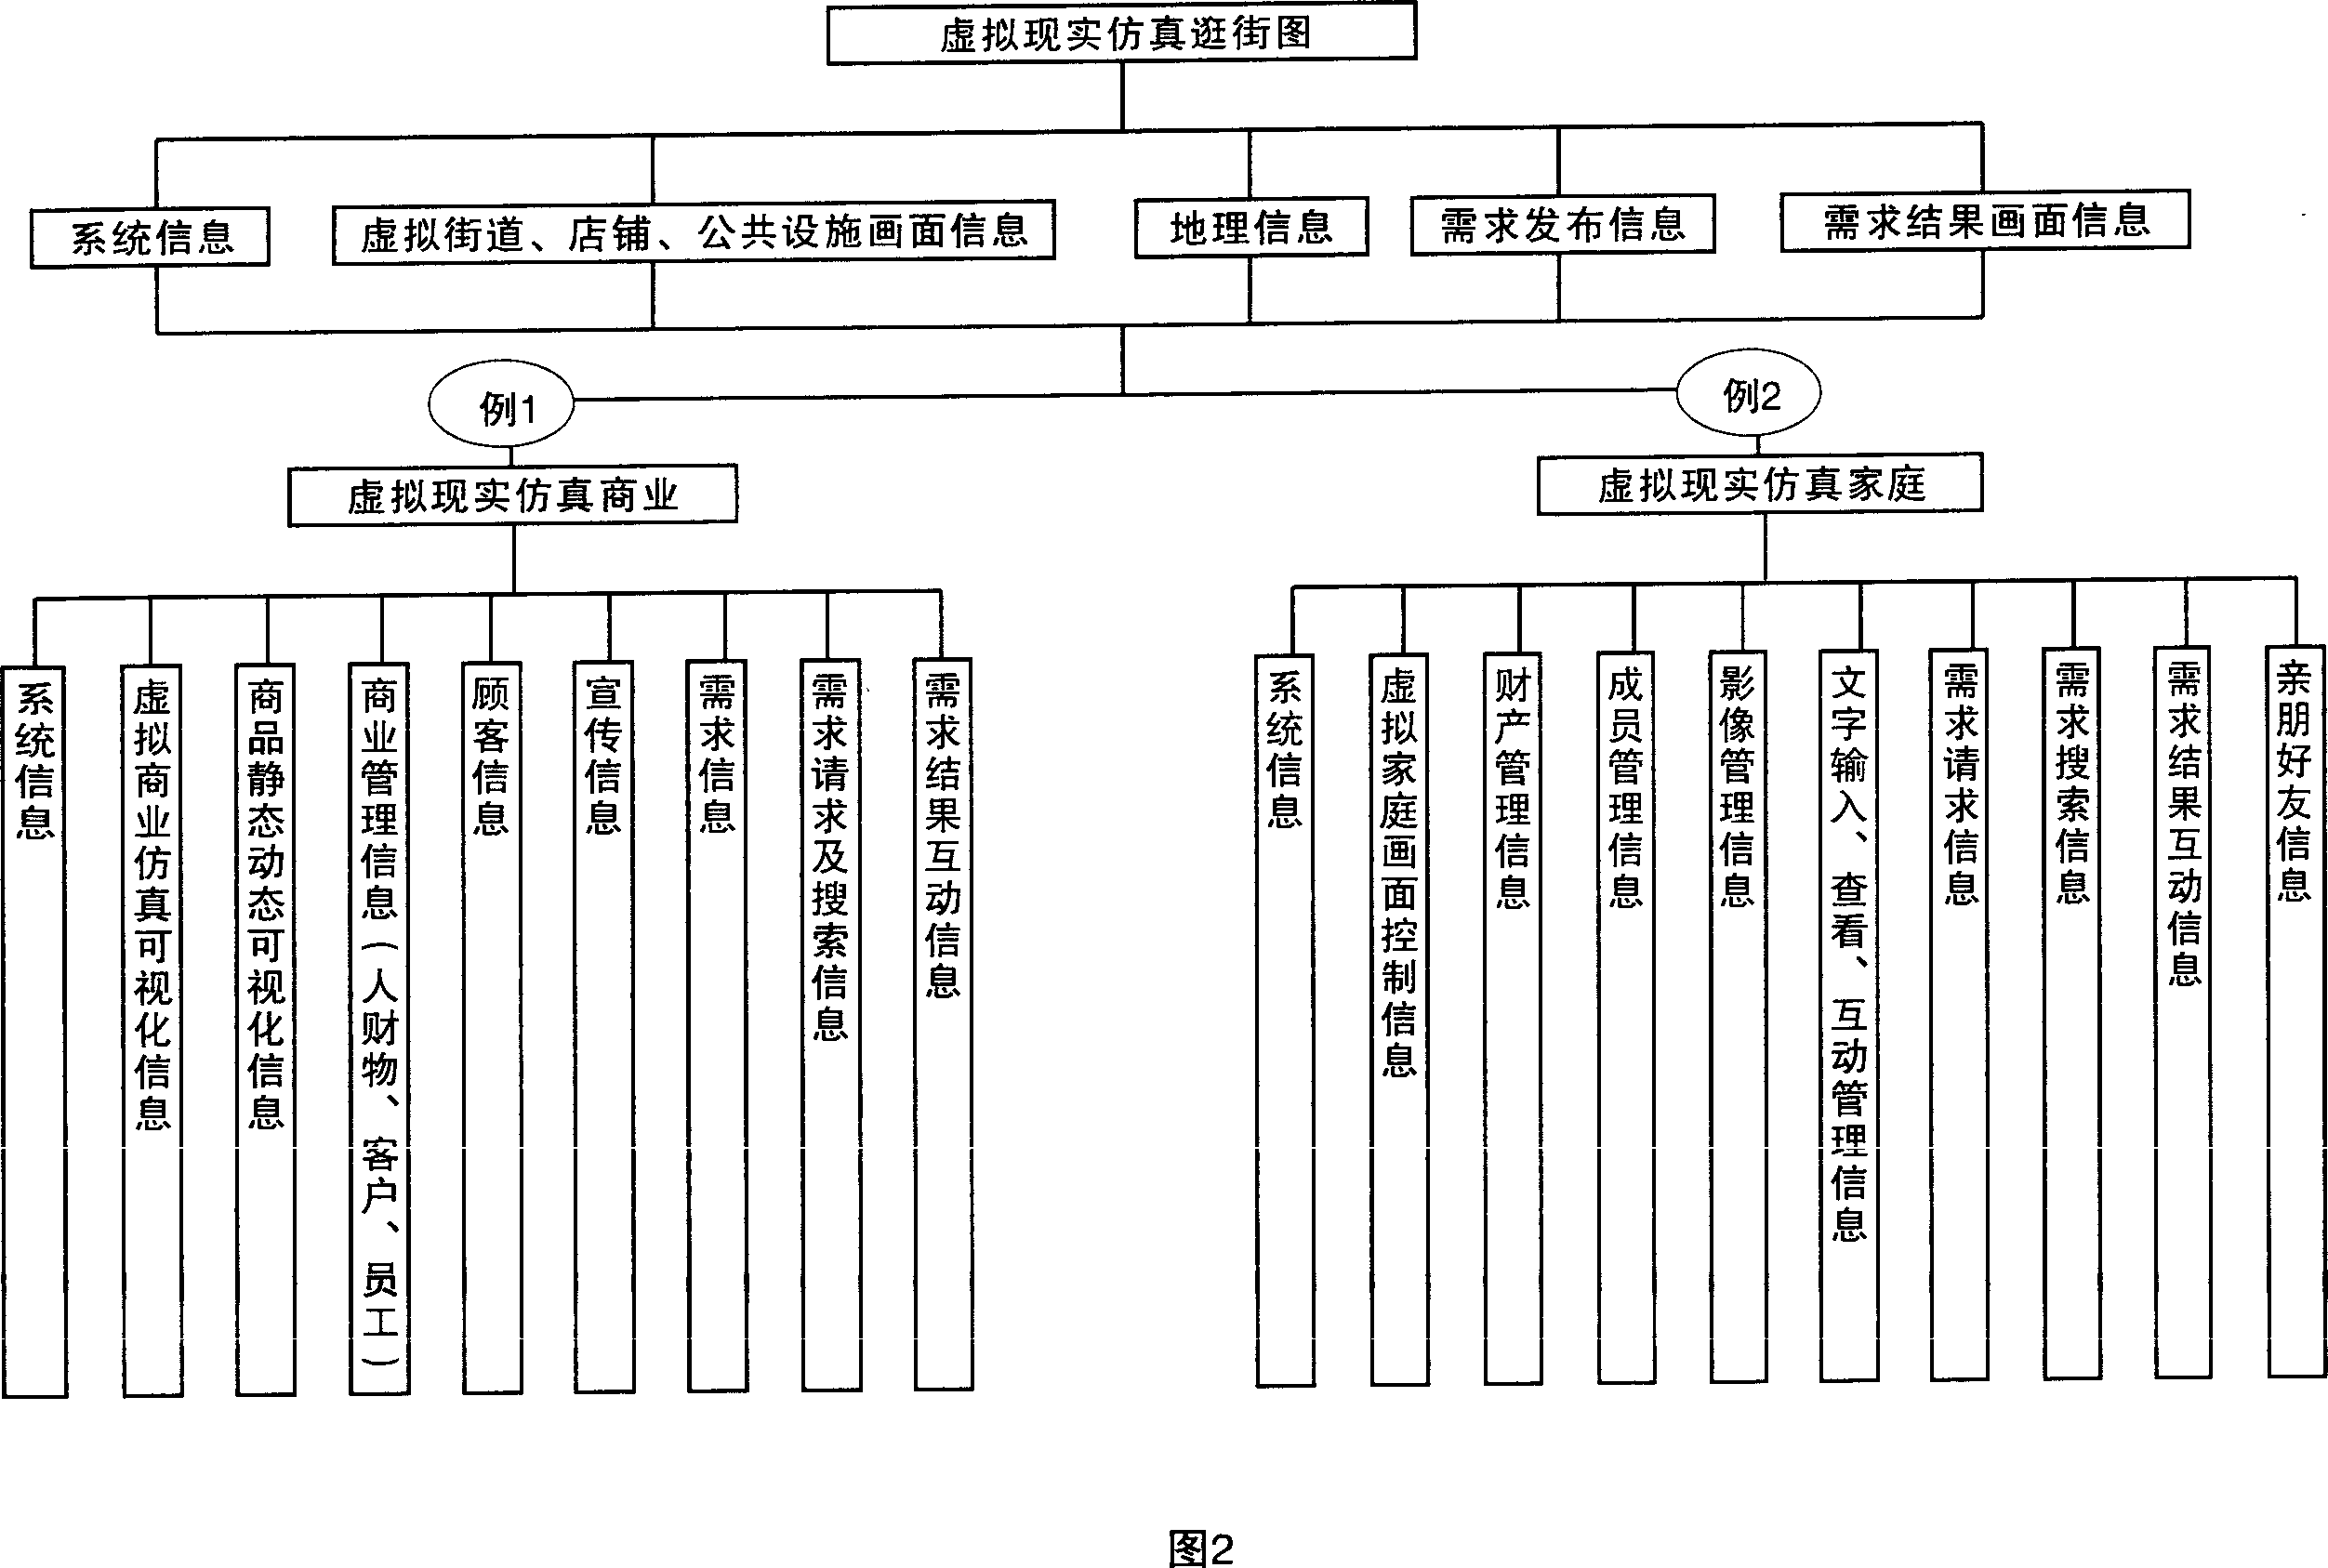 Method for realizing digital city system using virtual artificial comprehensive image and text information interaction